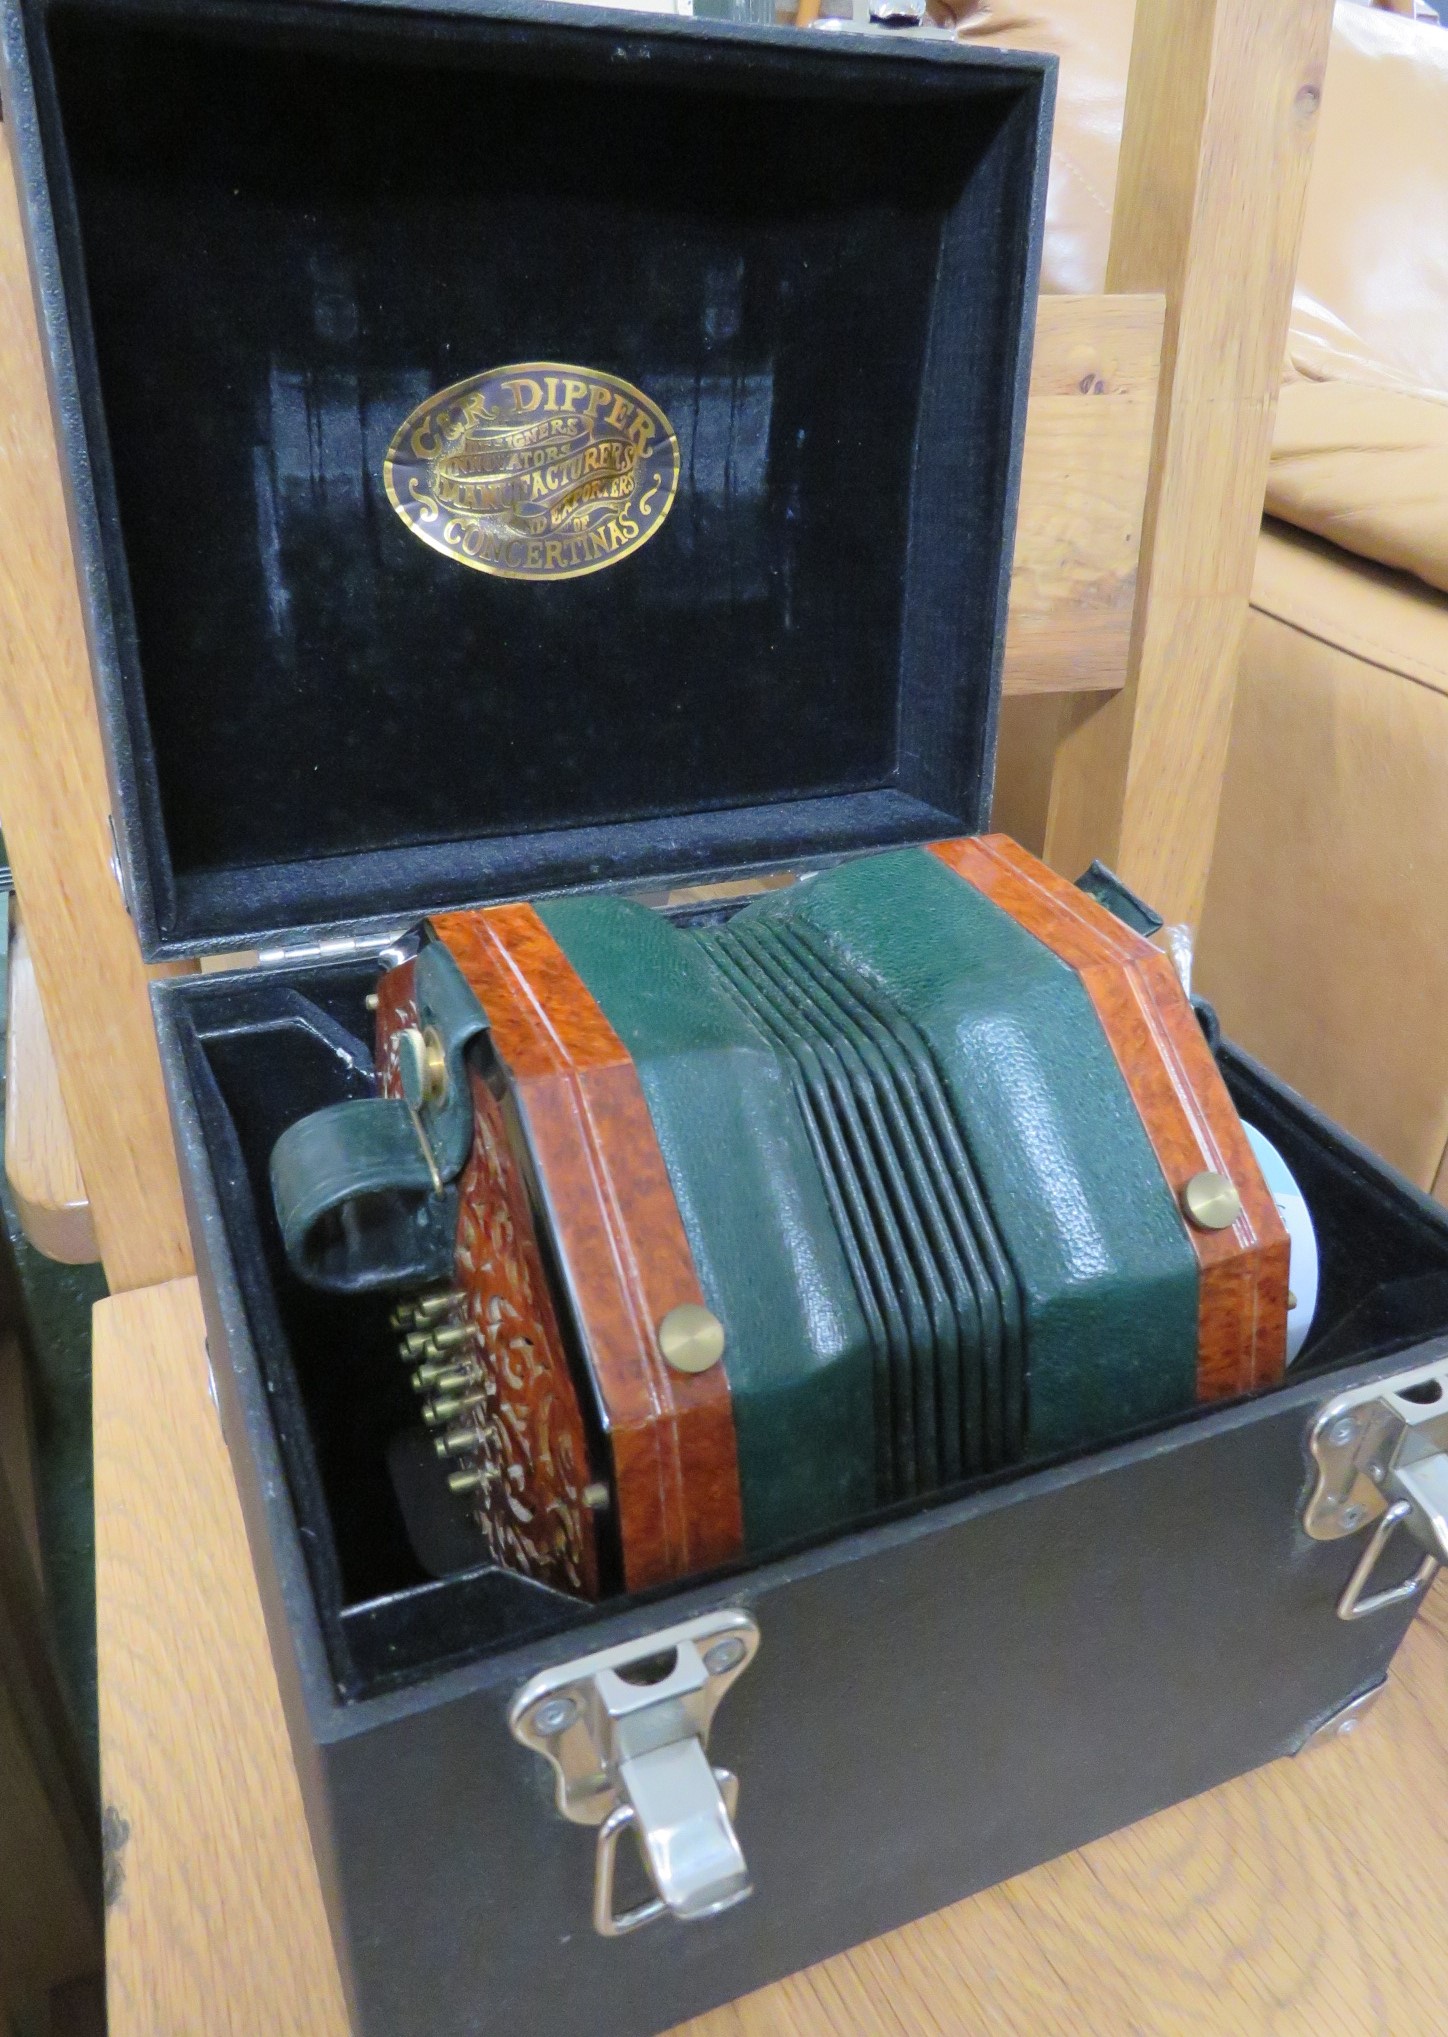 Colin Dipper forty-eight button 'English' system concertina tenor (viola range) with top note F - Image 18 of 20